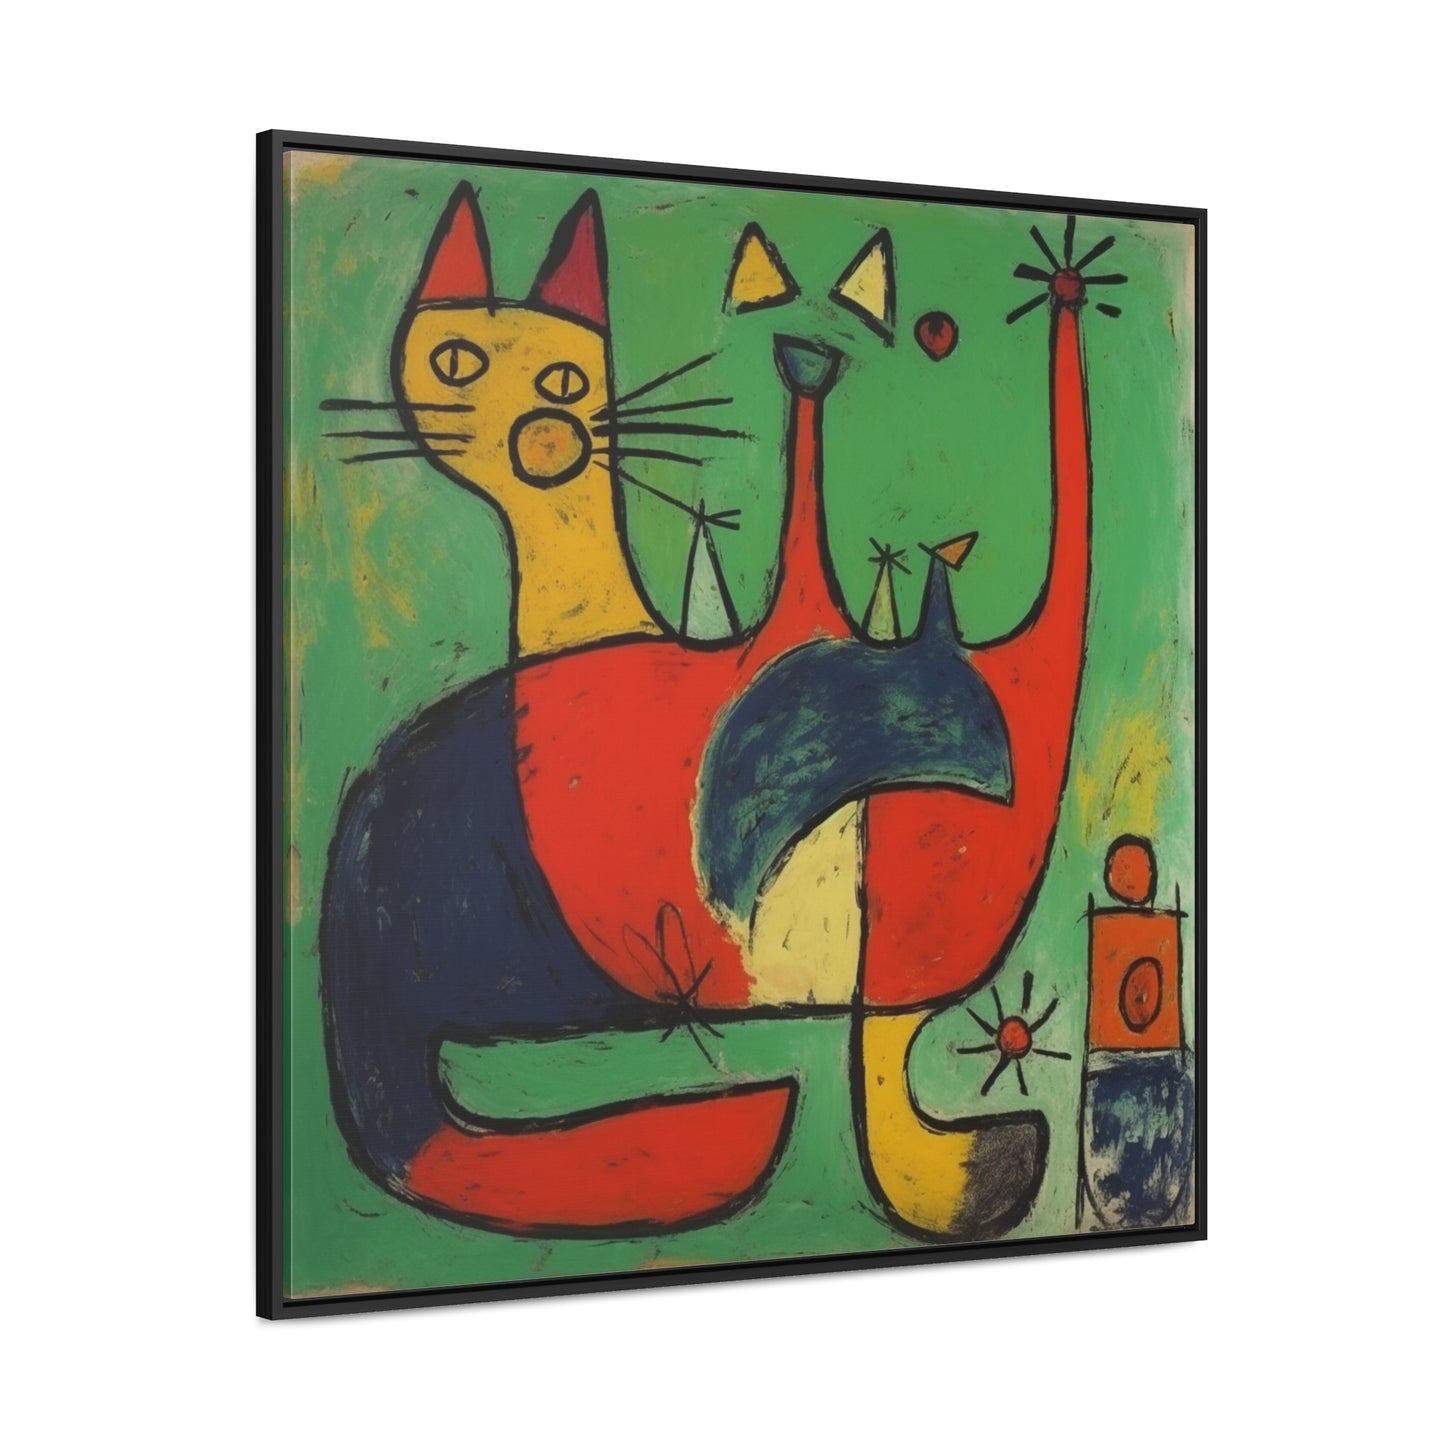 Cat 133, Gallery Canvas Wraps, Square Frame